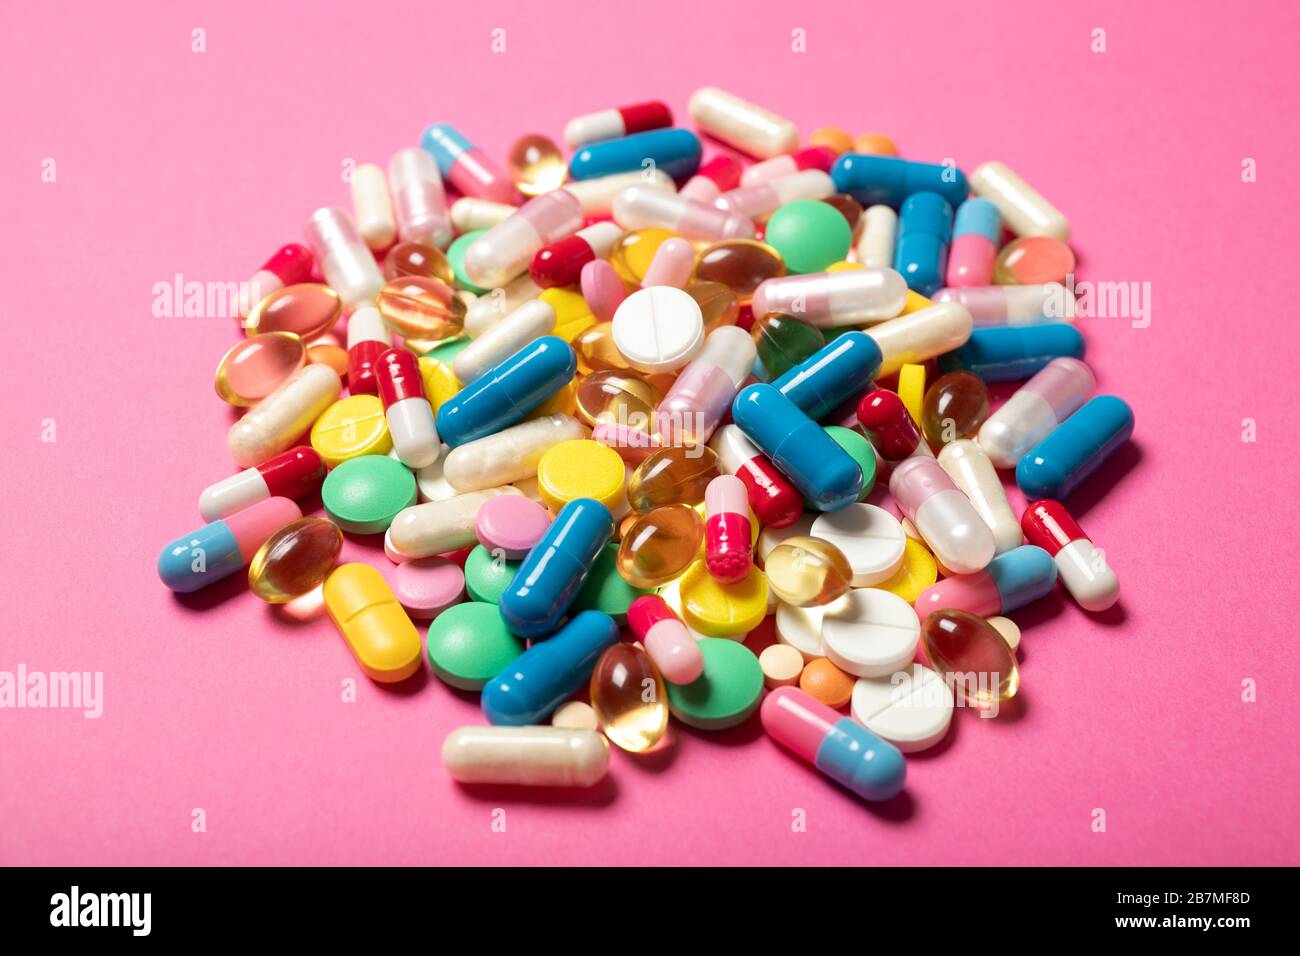 A lot of multi-colored pills on a pink background. Stock Photo